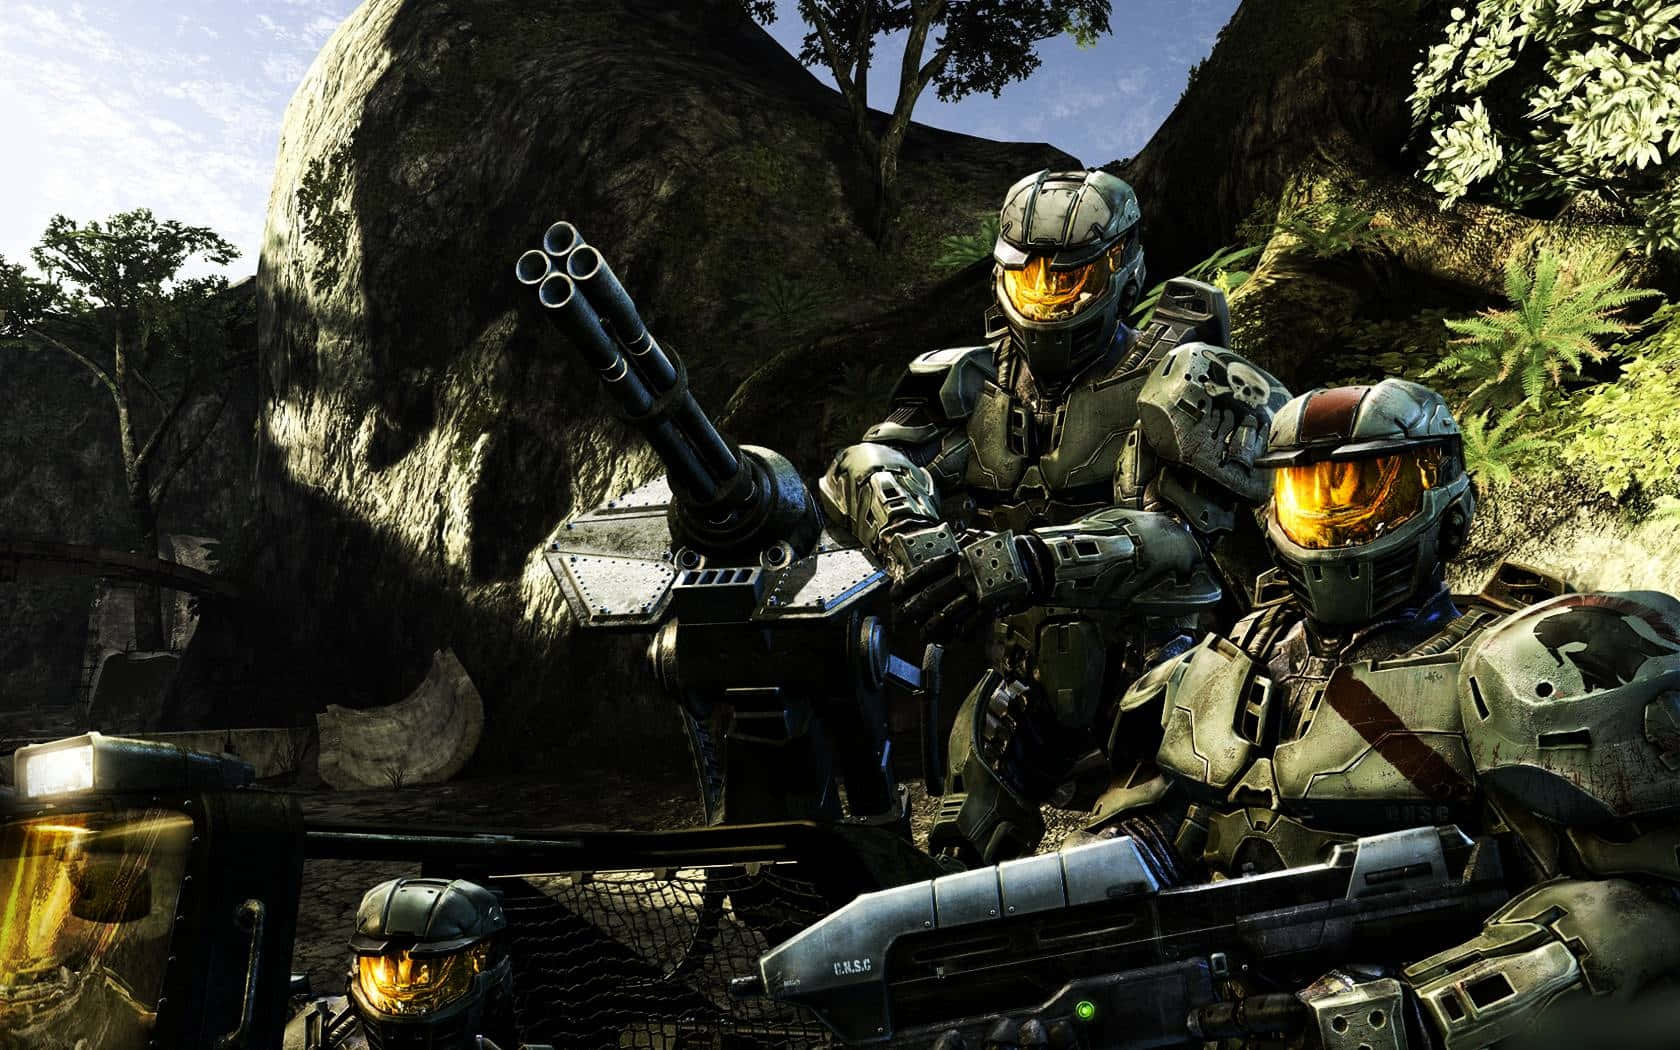 “Prepare for battle with the Master Chief”